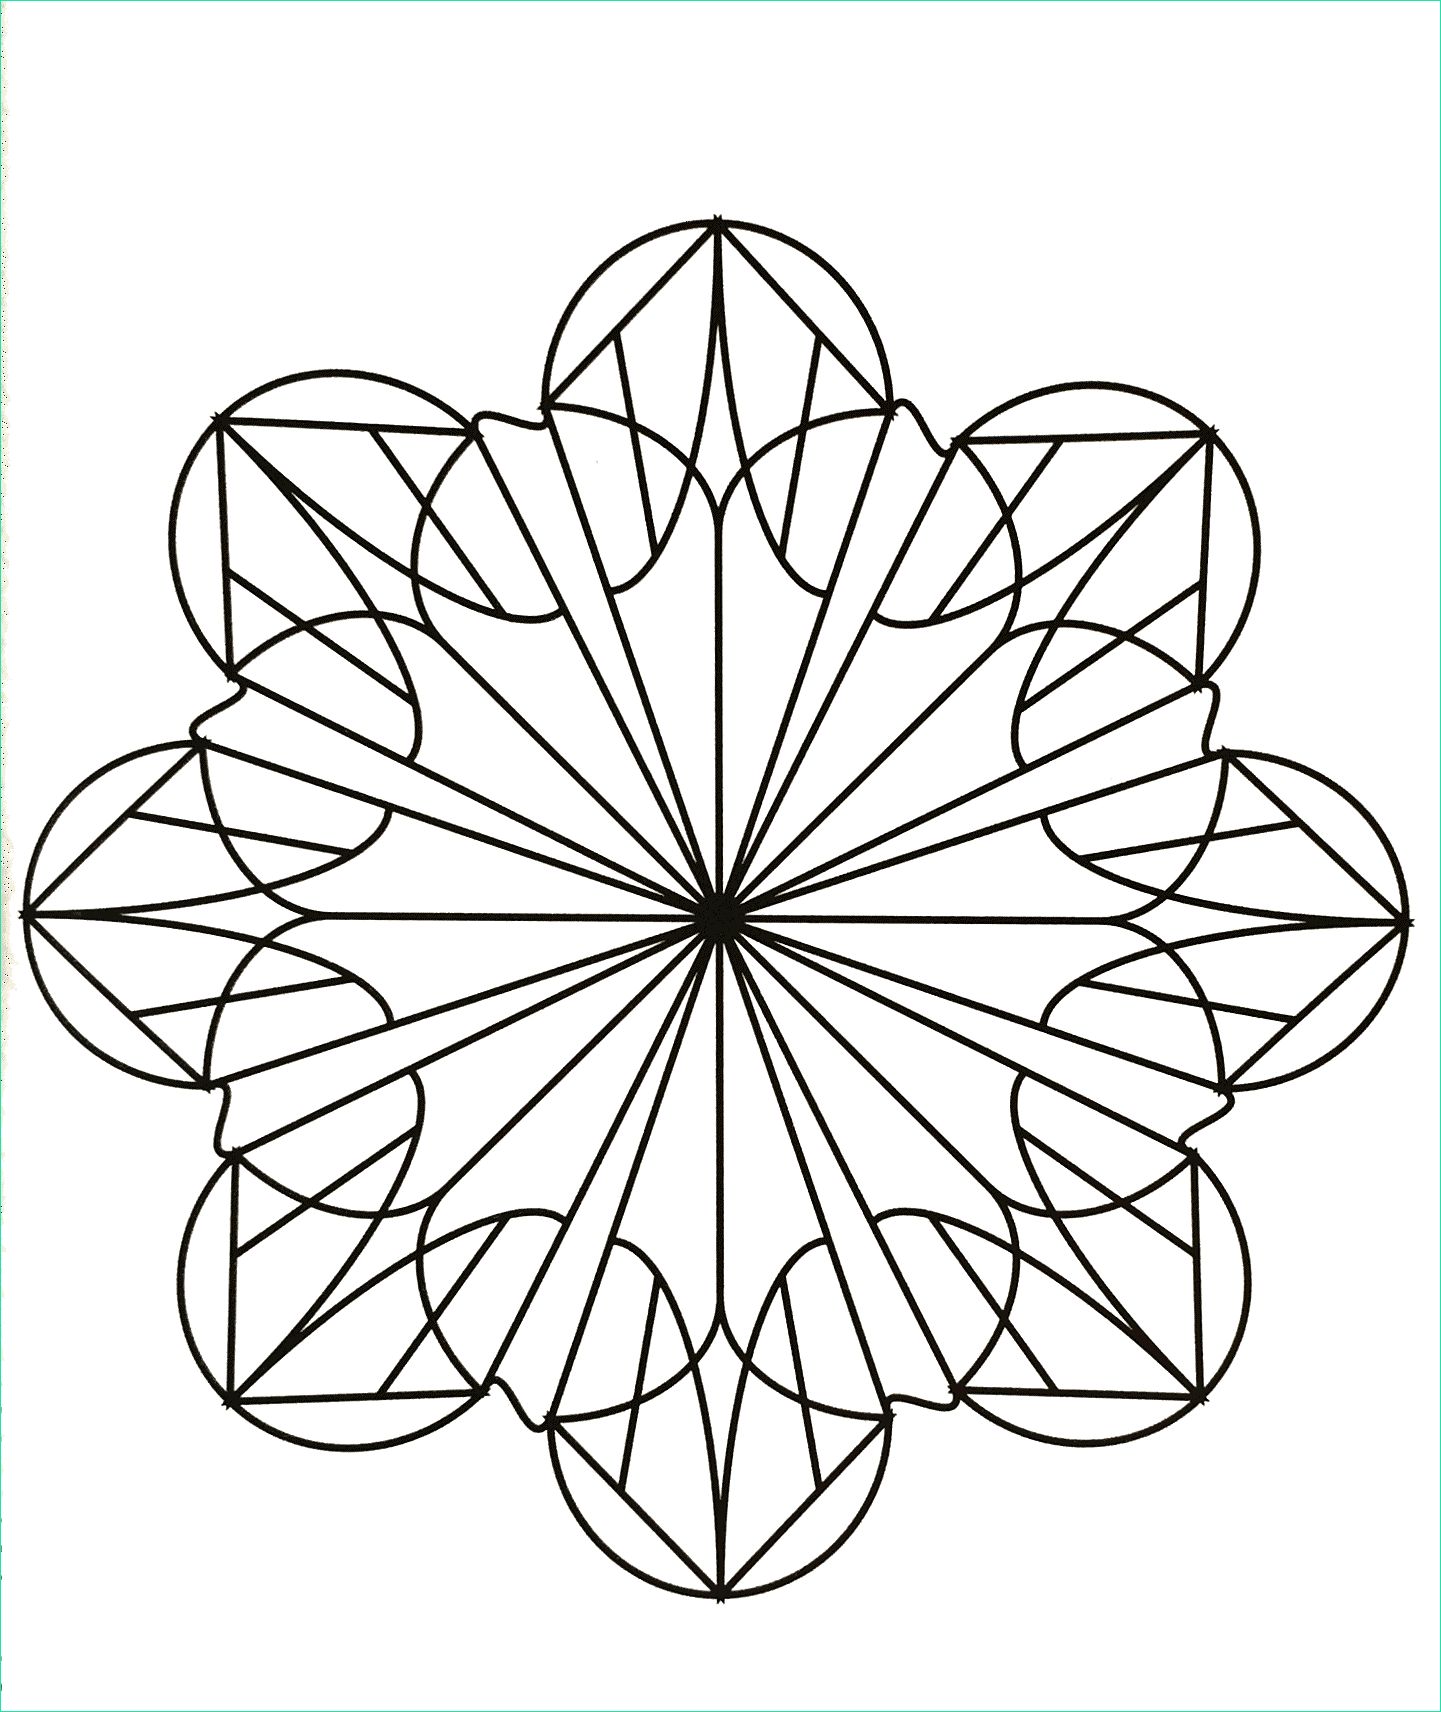 image=easy mandala to easy and abstract 3